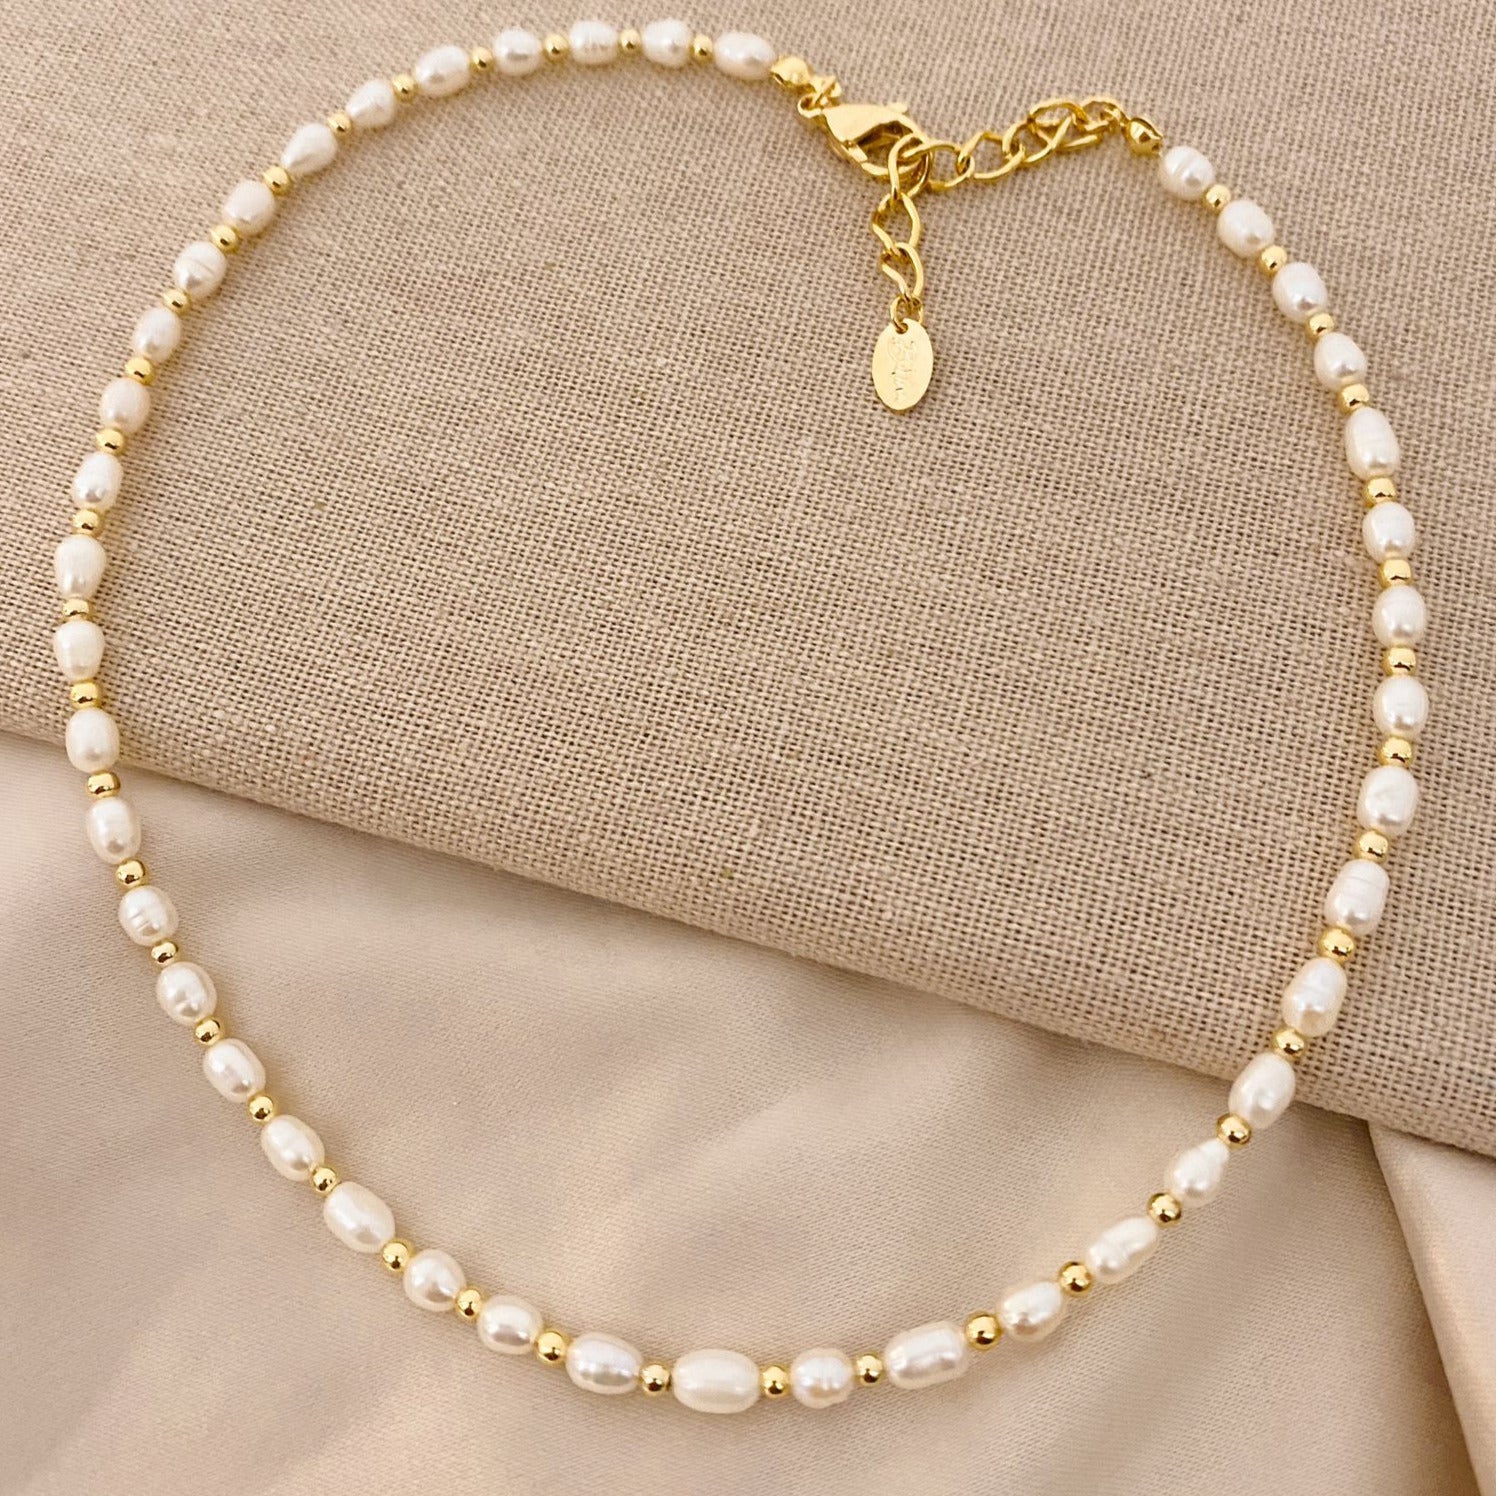 Necklace of Natural Pearls and Gold Filled